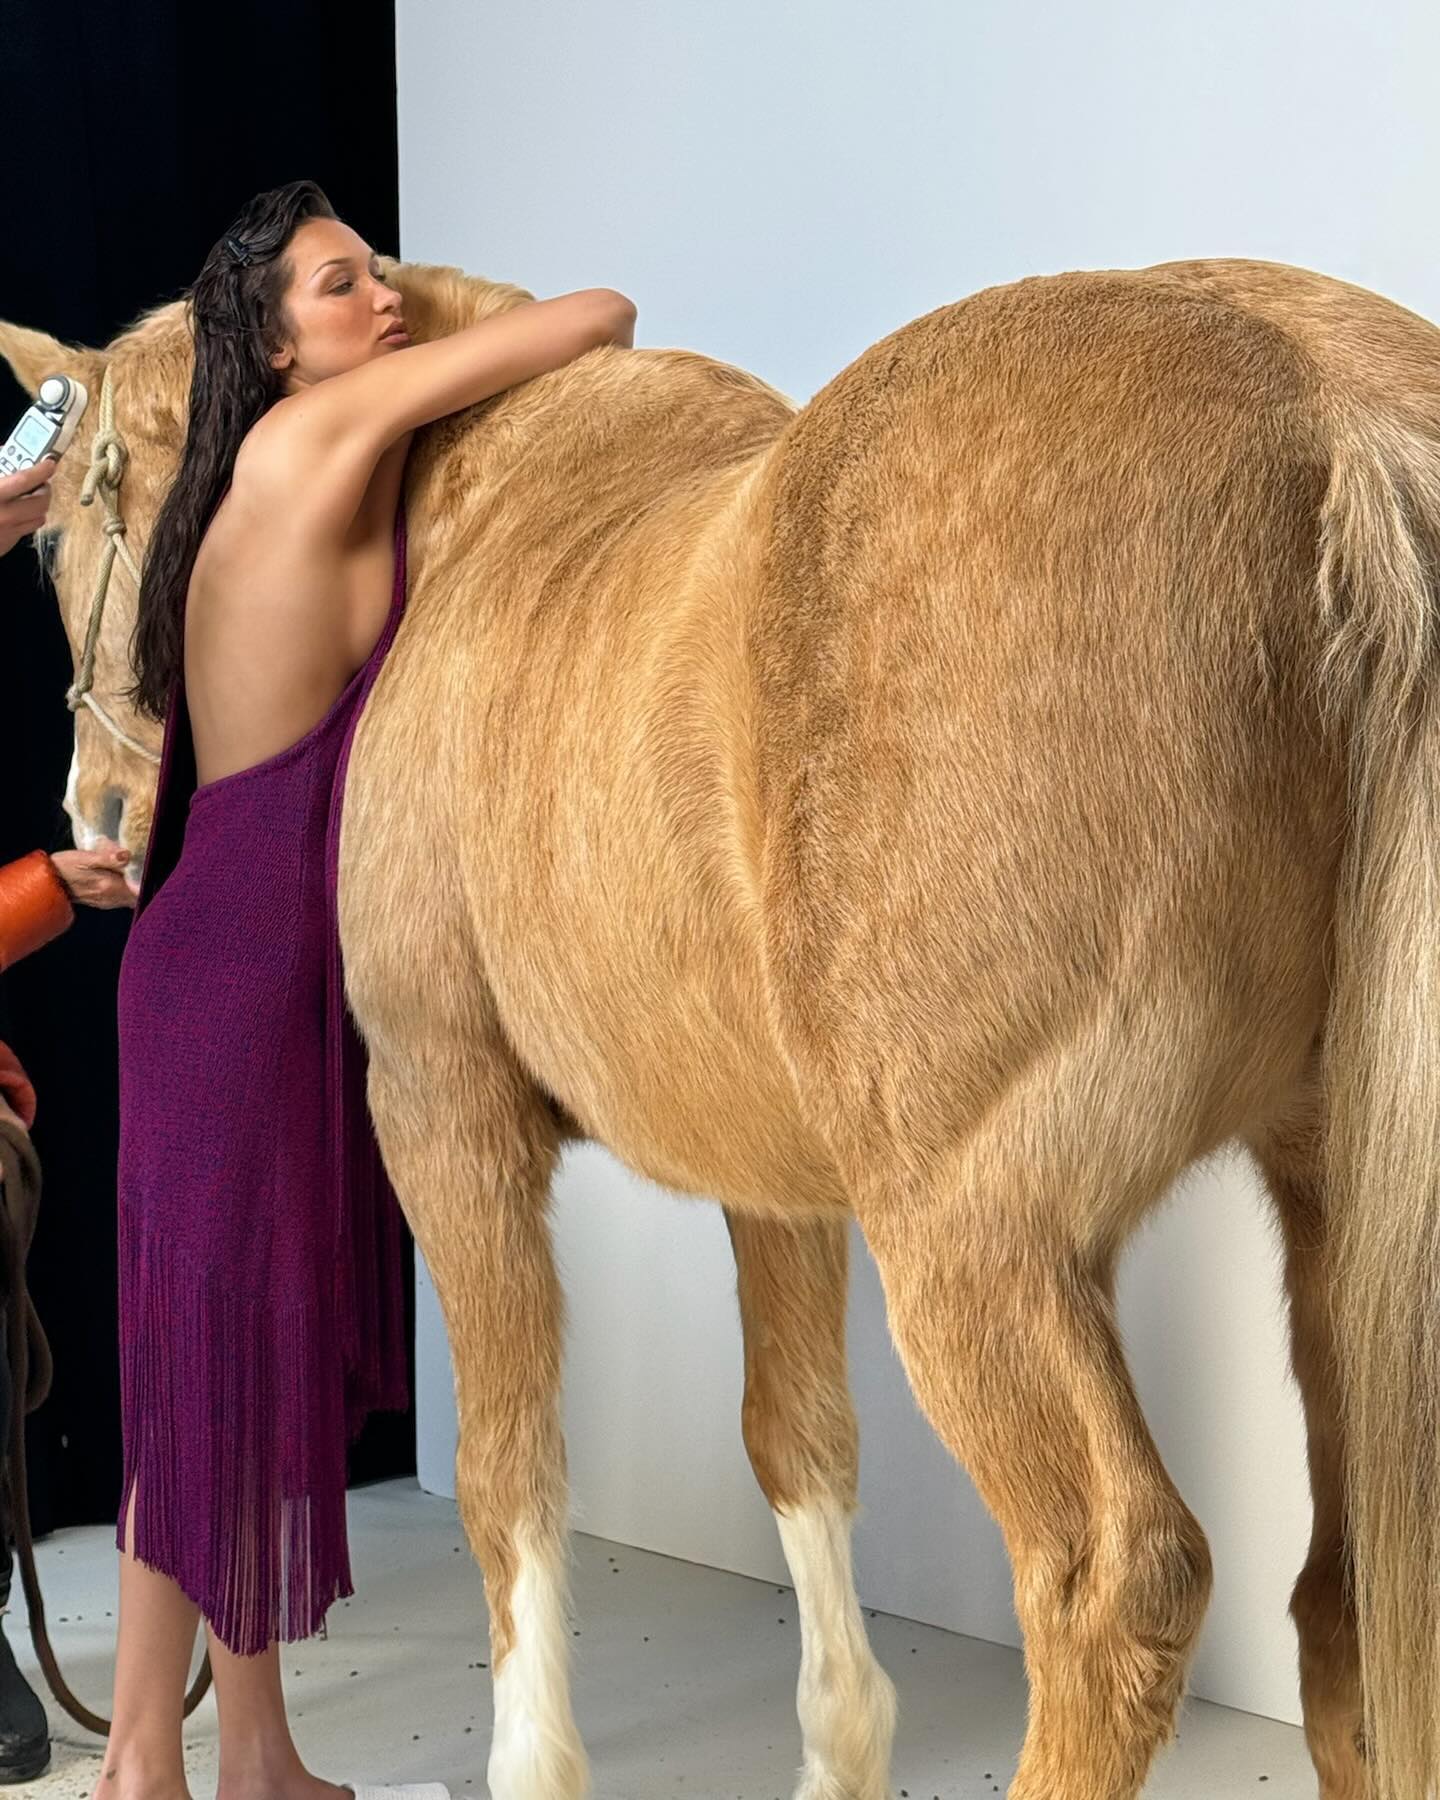 Photos n°2 : Bella Hadid is Horsing Around on the Set of Her New Vogue Shoot!